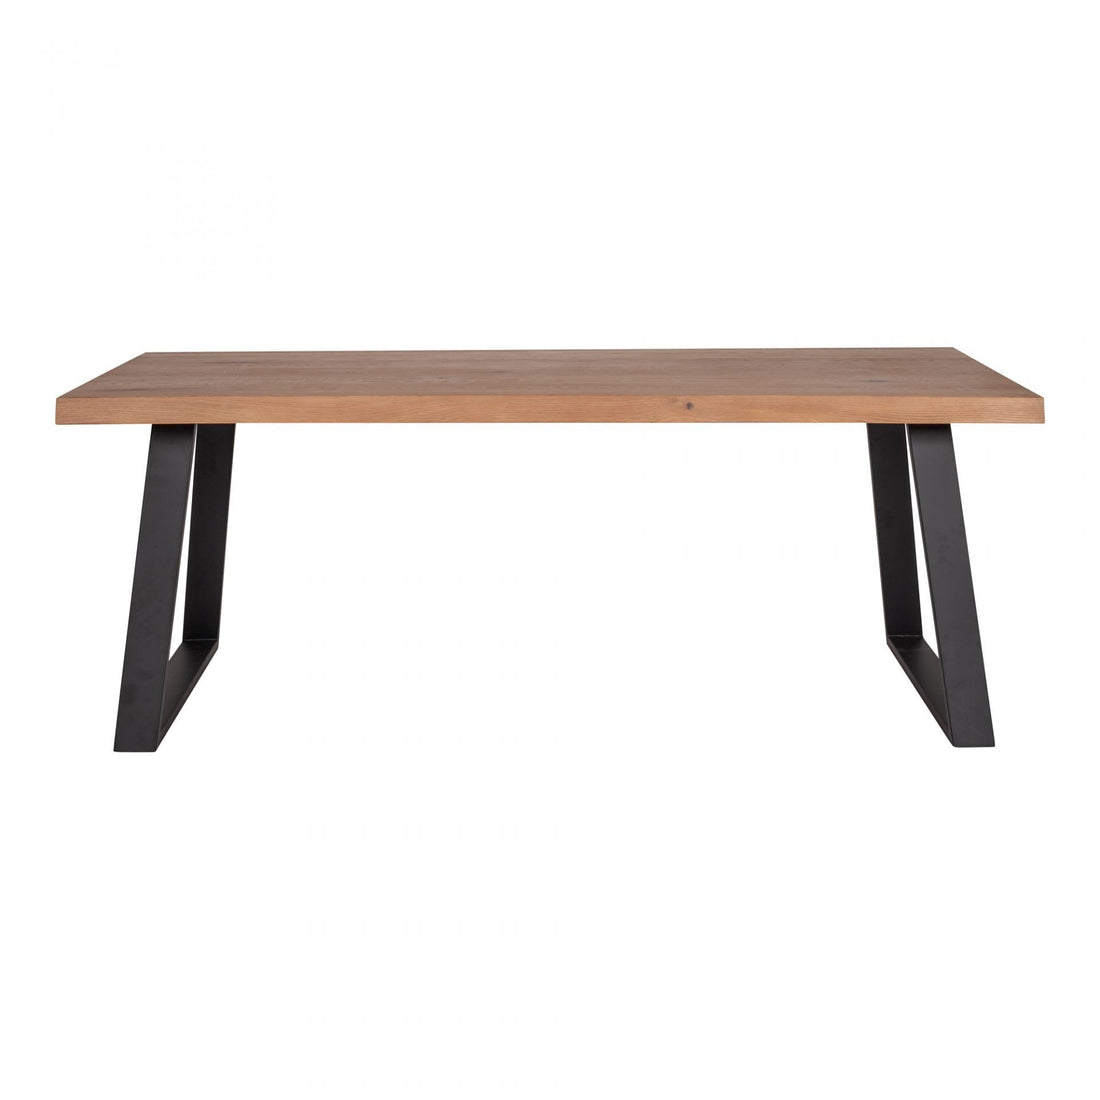 Live Edge Rectangular Dining Table: Rustic Dining with a Modern Twist